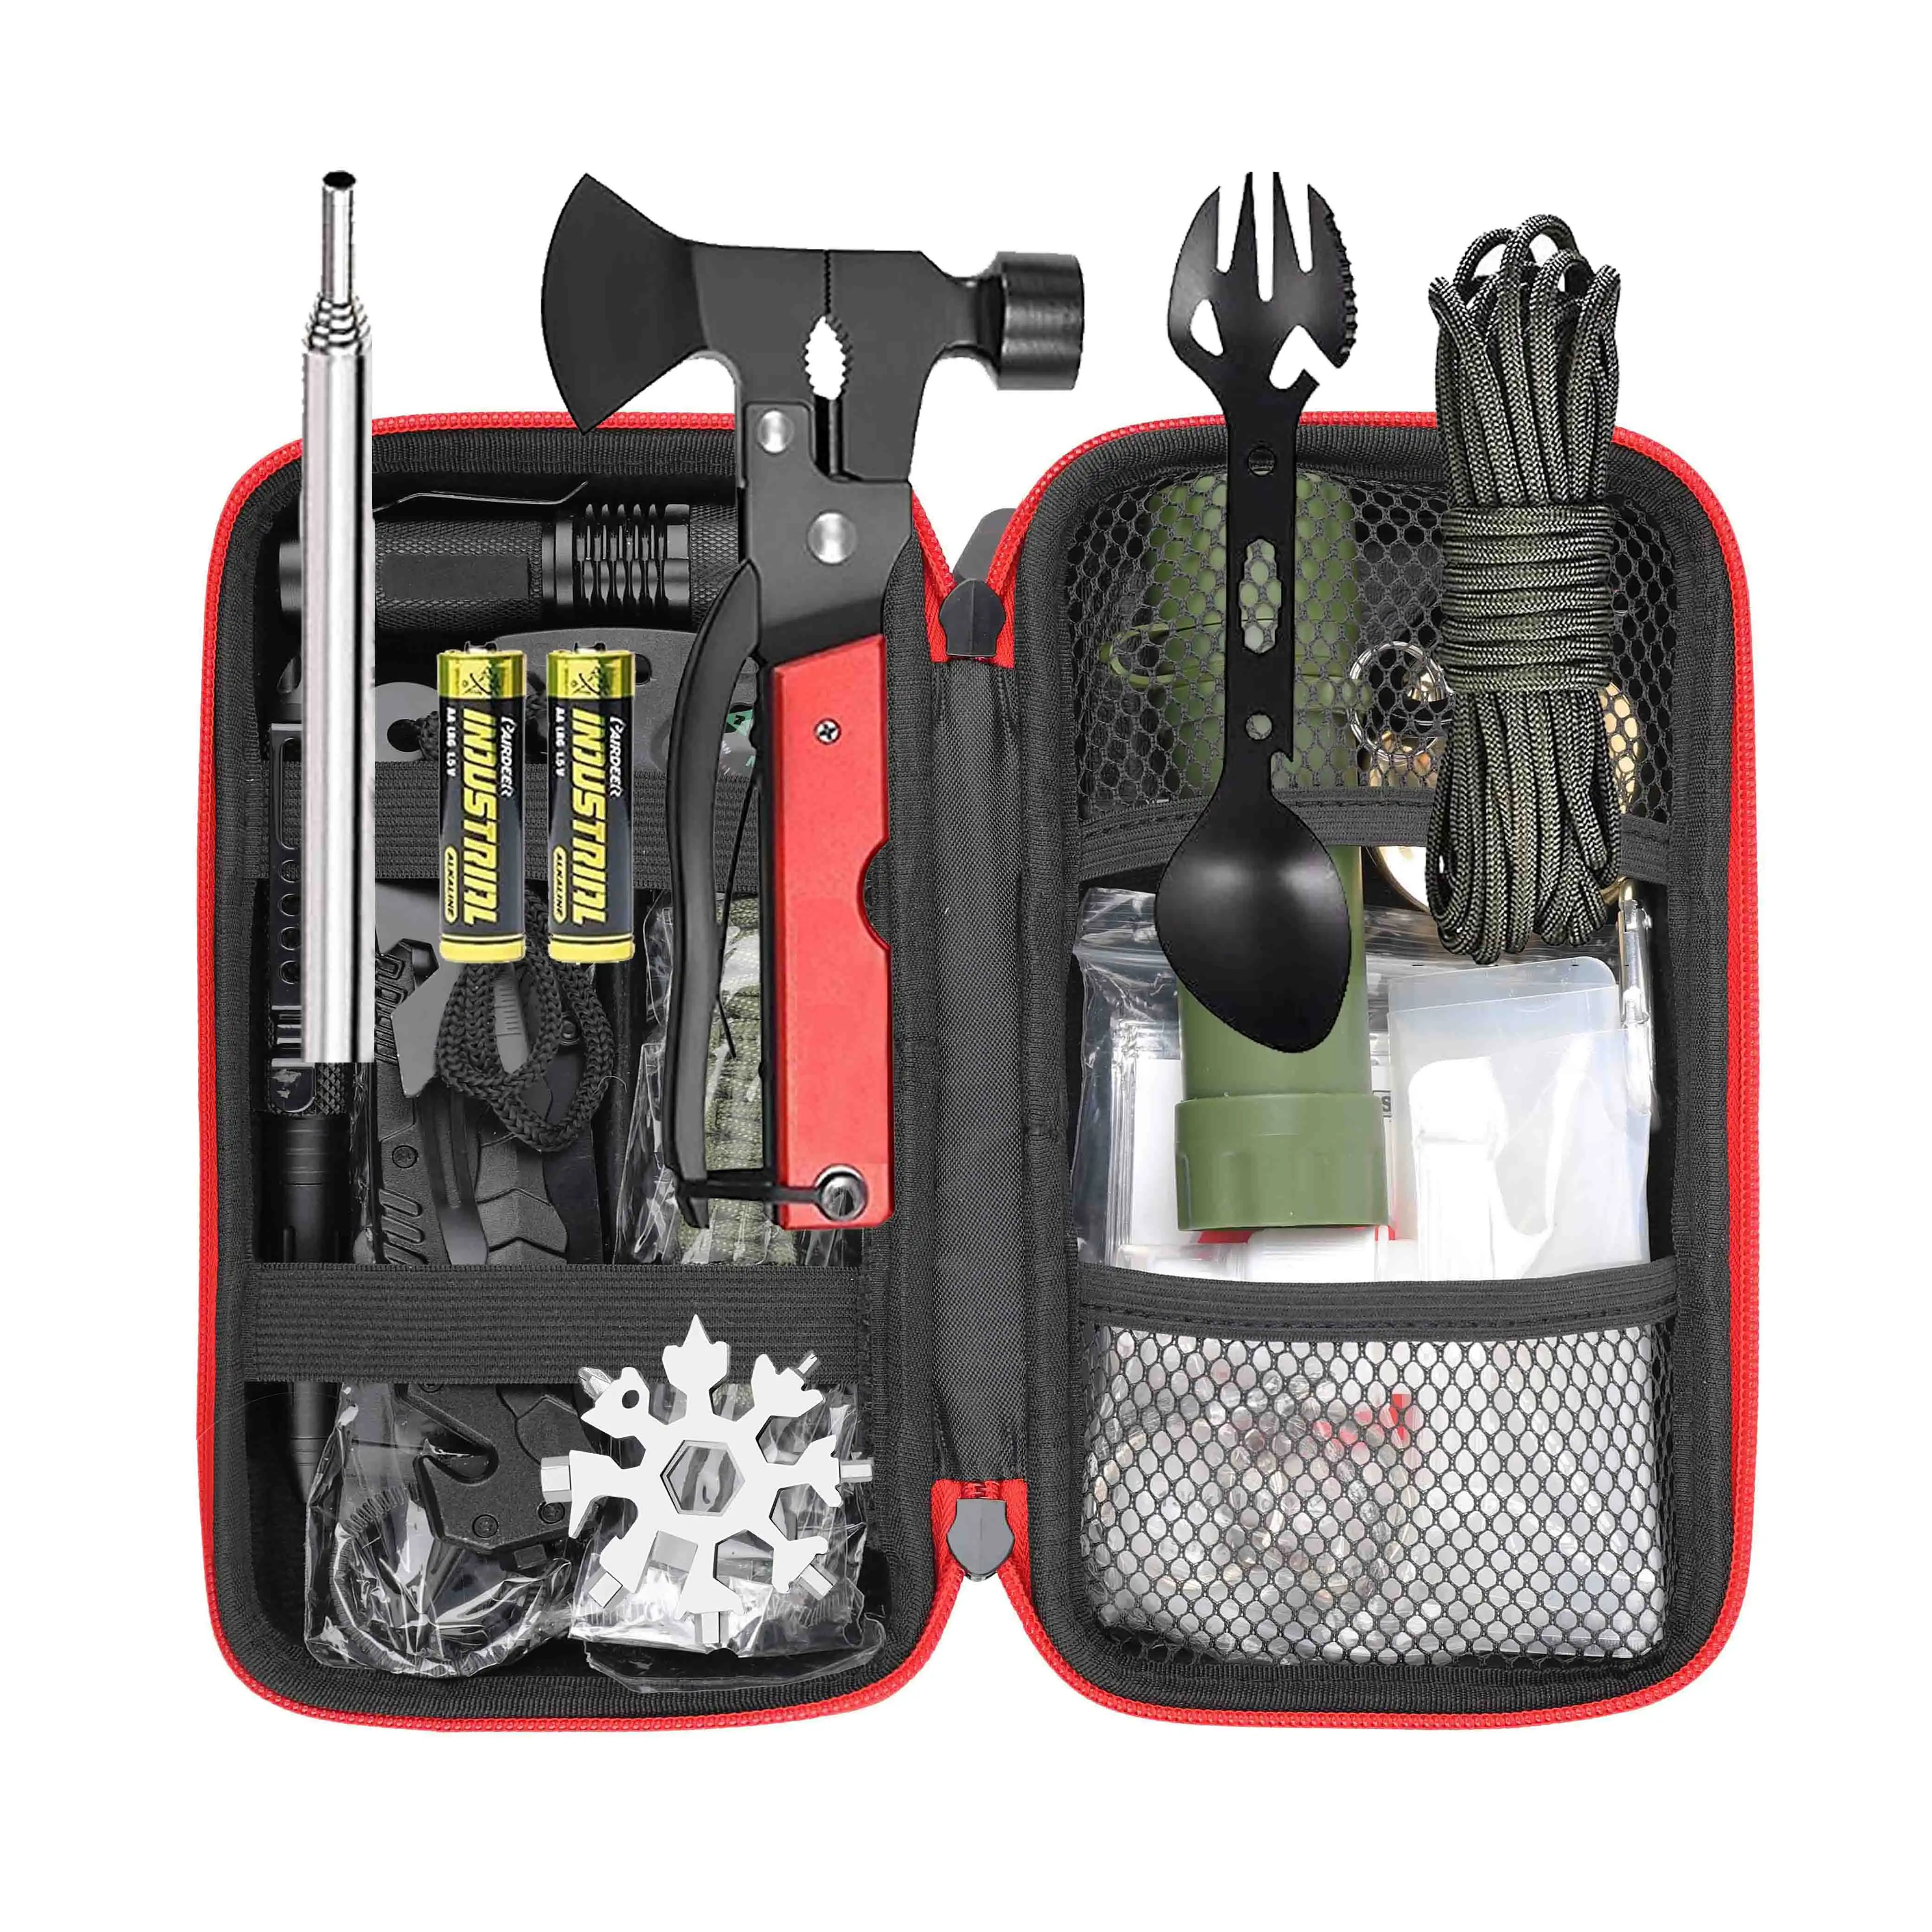 2021 SHBC EDC Emergency Survival Kit Set, Camping Hiking Gear With Straw Water Filter